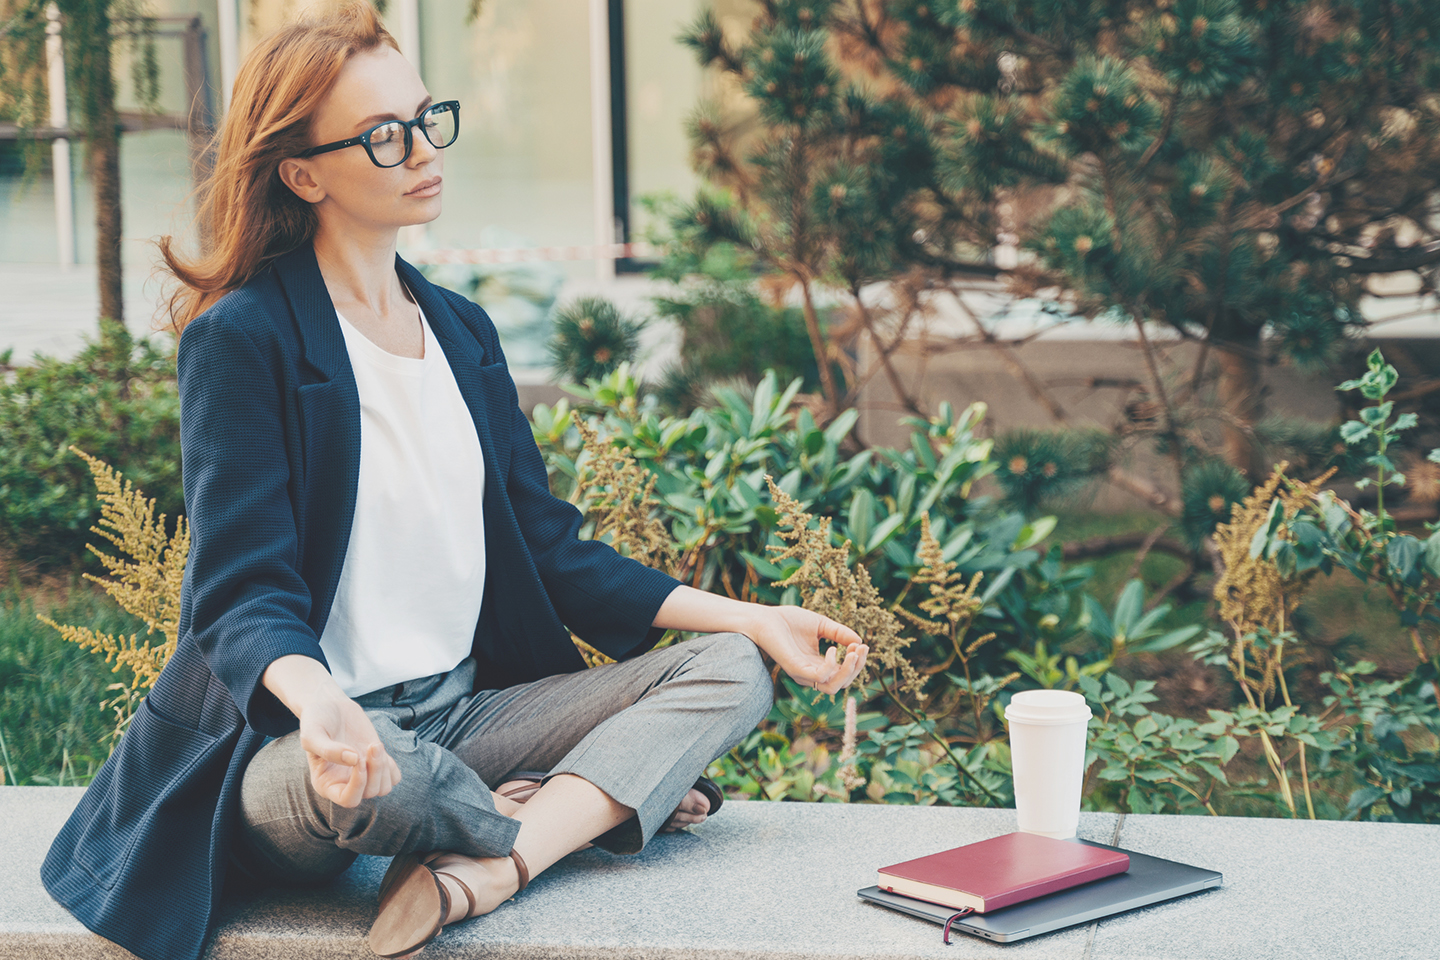 Calm red-haired woman relaxing meditating while working remotely on laptop outdoors